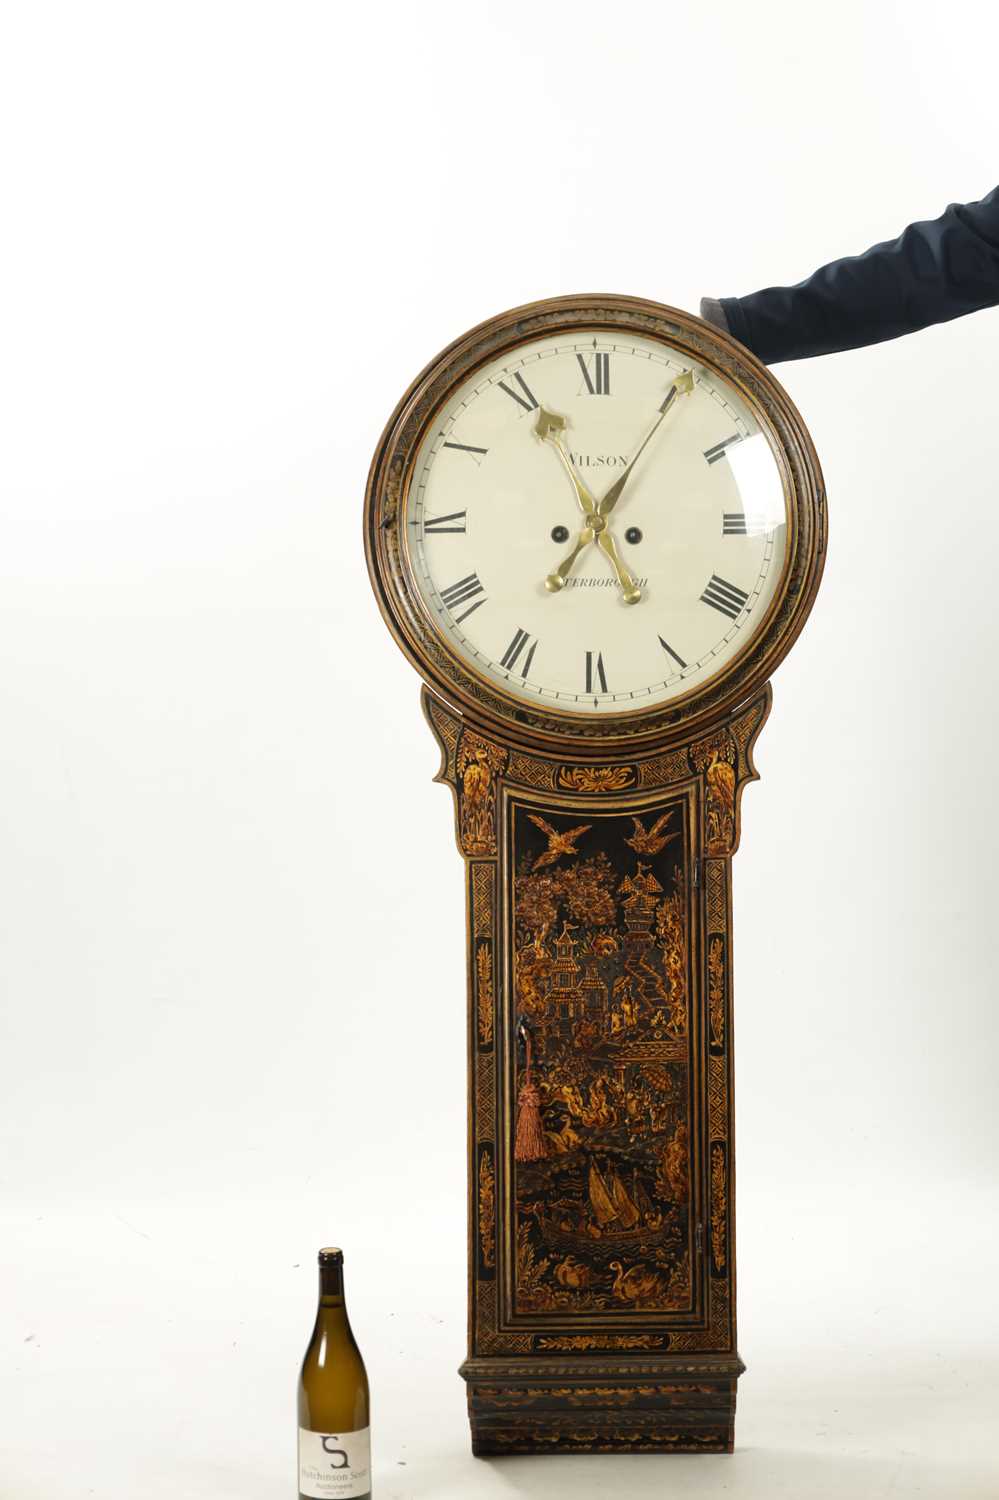 WILSON, PETERBOROUGH. A GEORGE III LACQUERED CHINOISERIE STRIKING TAVERN CLOCK - Image 5 of 10